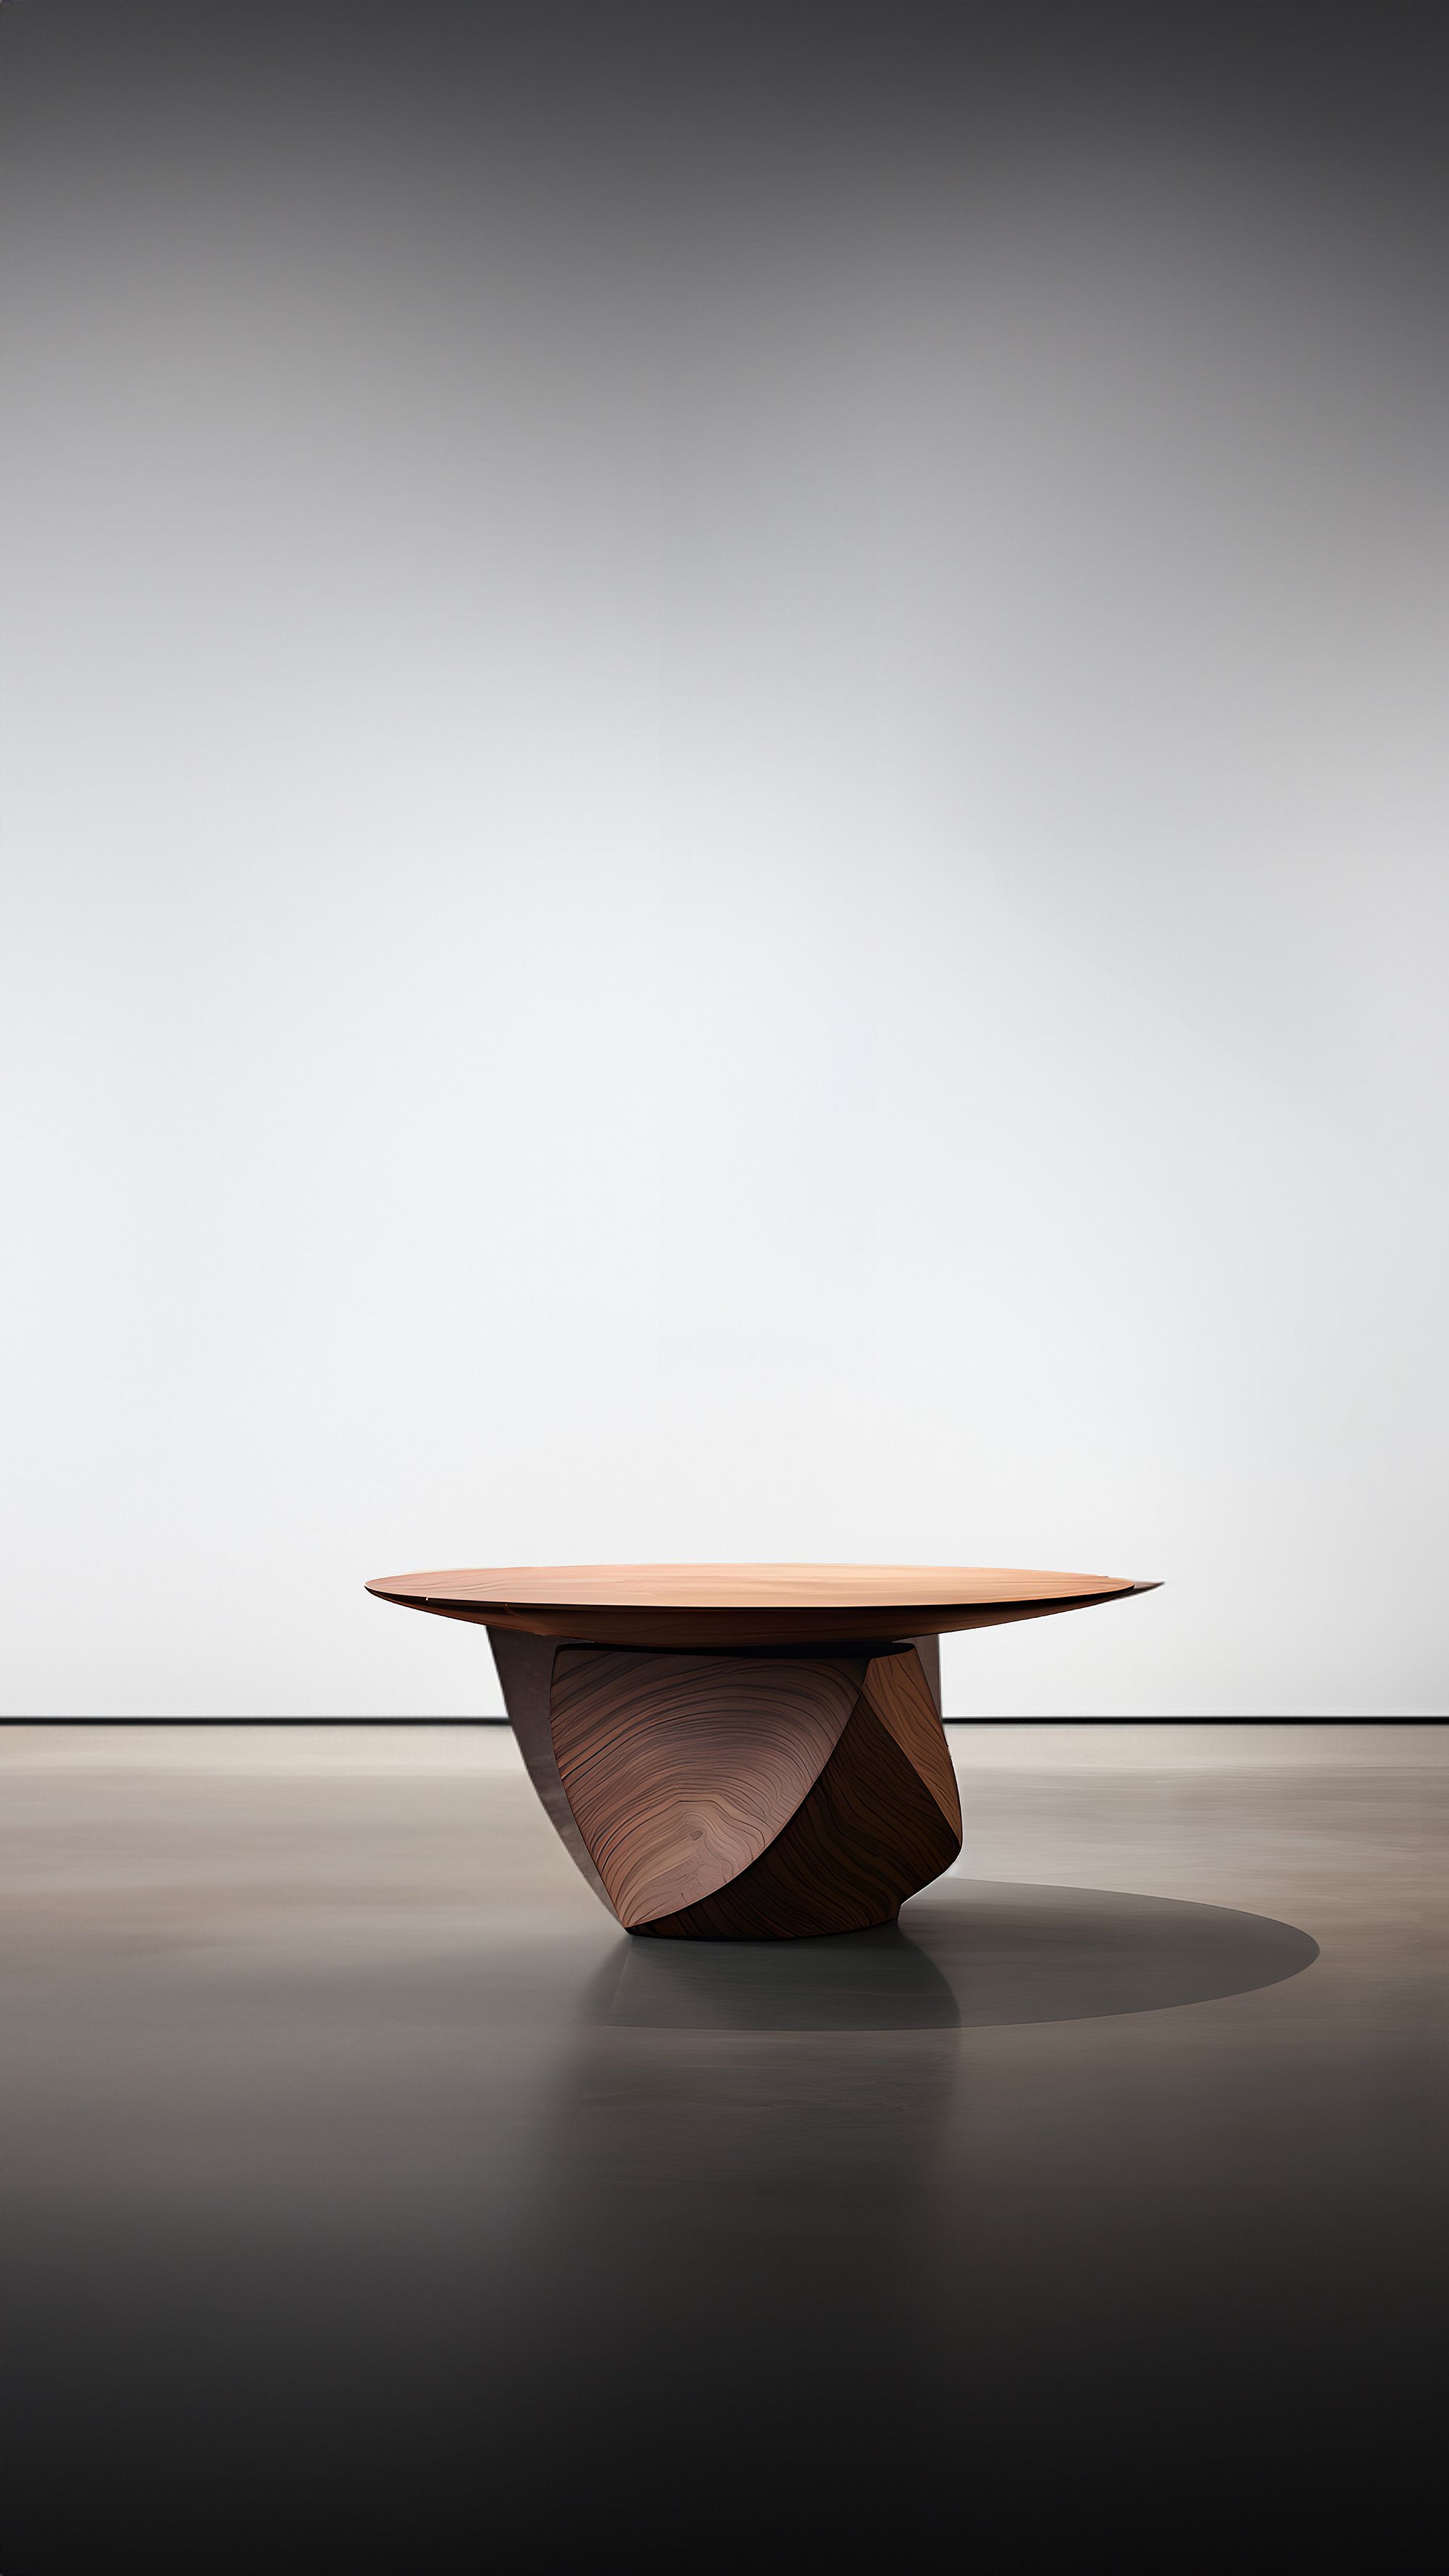 Sculptural Coffee Table Made of Solid Wood, Center Table Solace S37 by Joel Escalona — 8.jpg